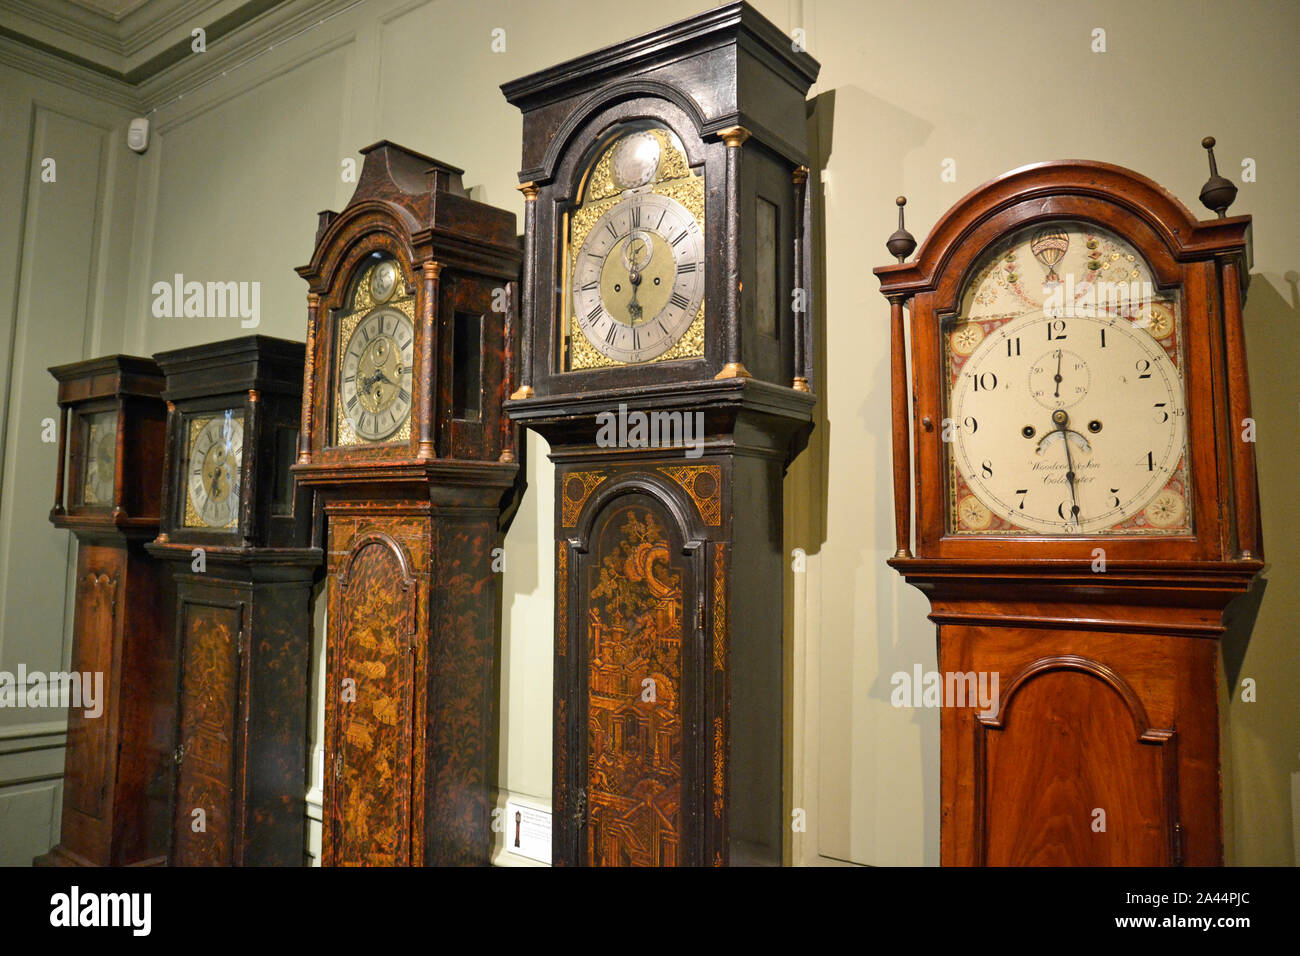 Display of grandfather clocks Hollytrees Museum, Castle Park, Colchester, Essex, UK Stock Photo